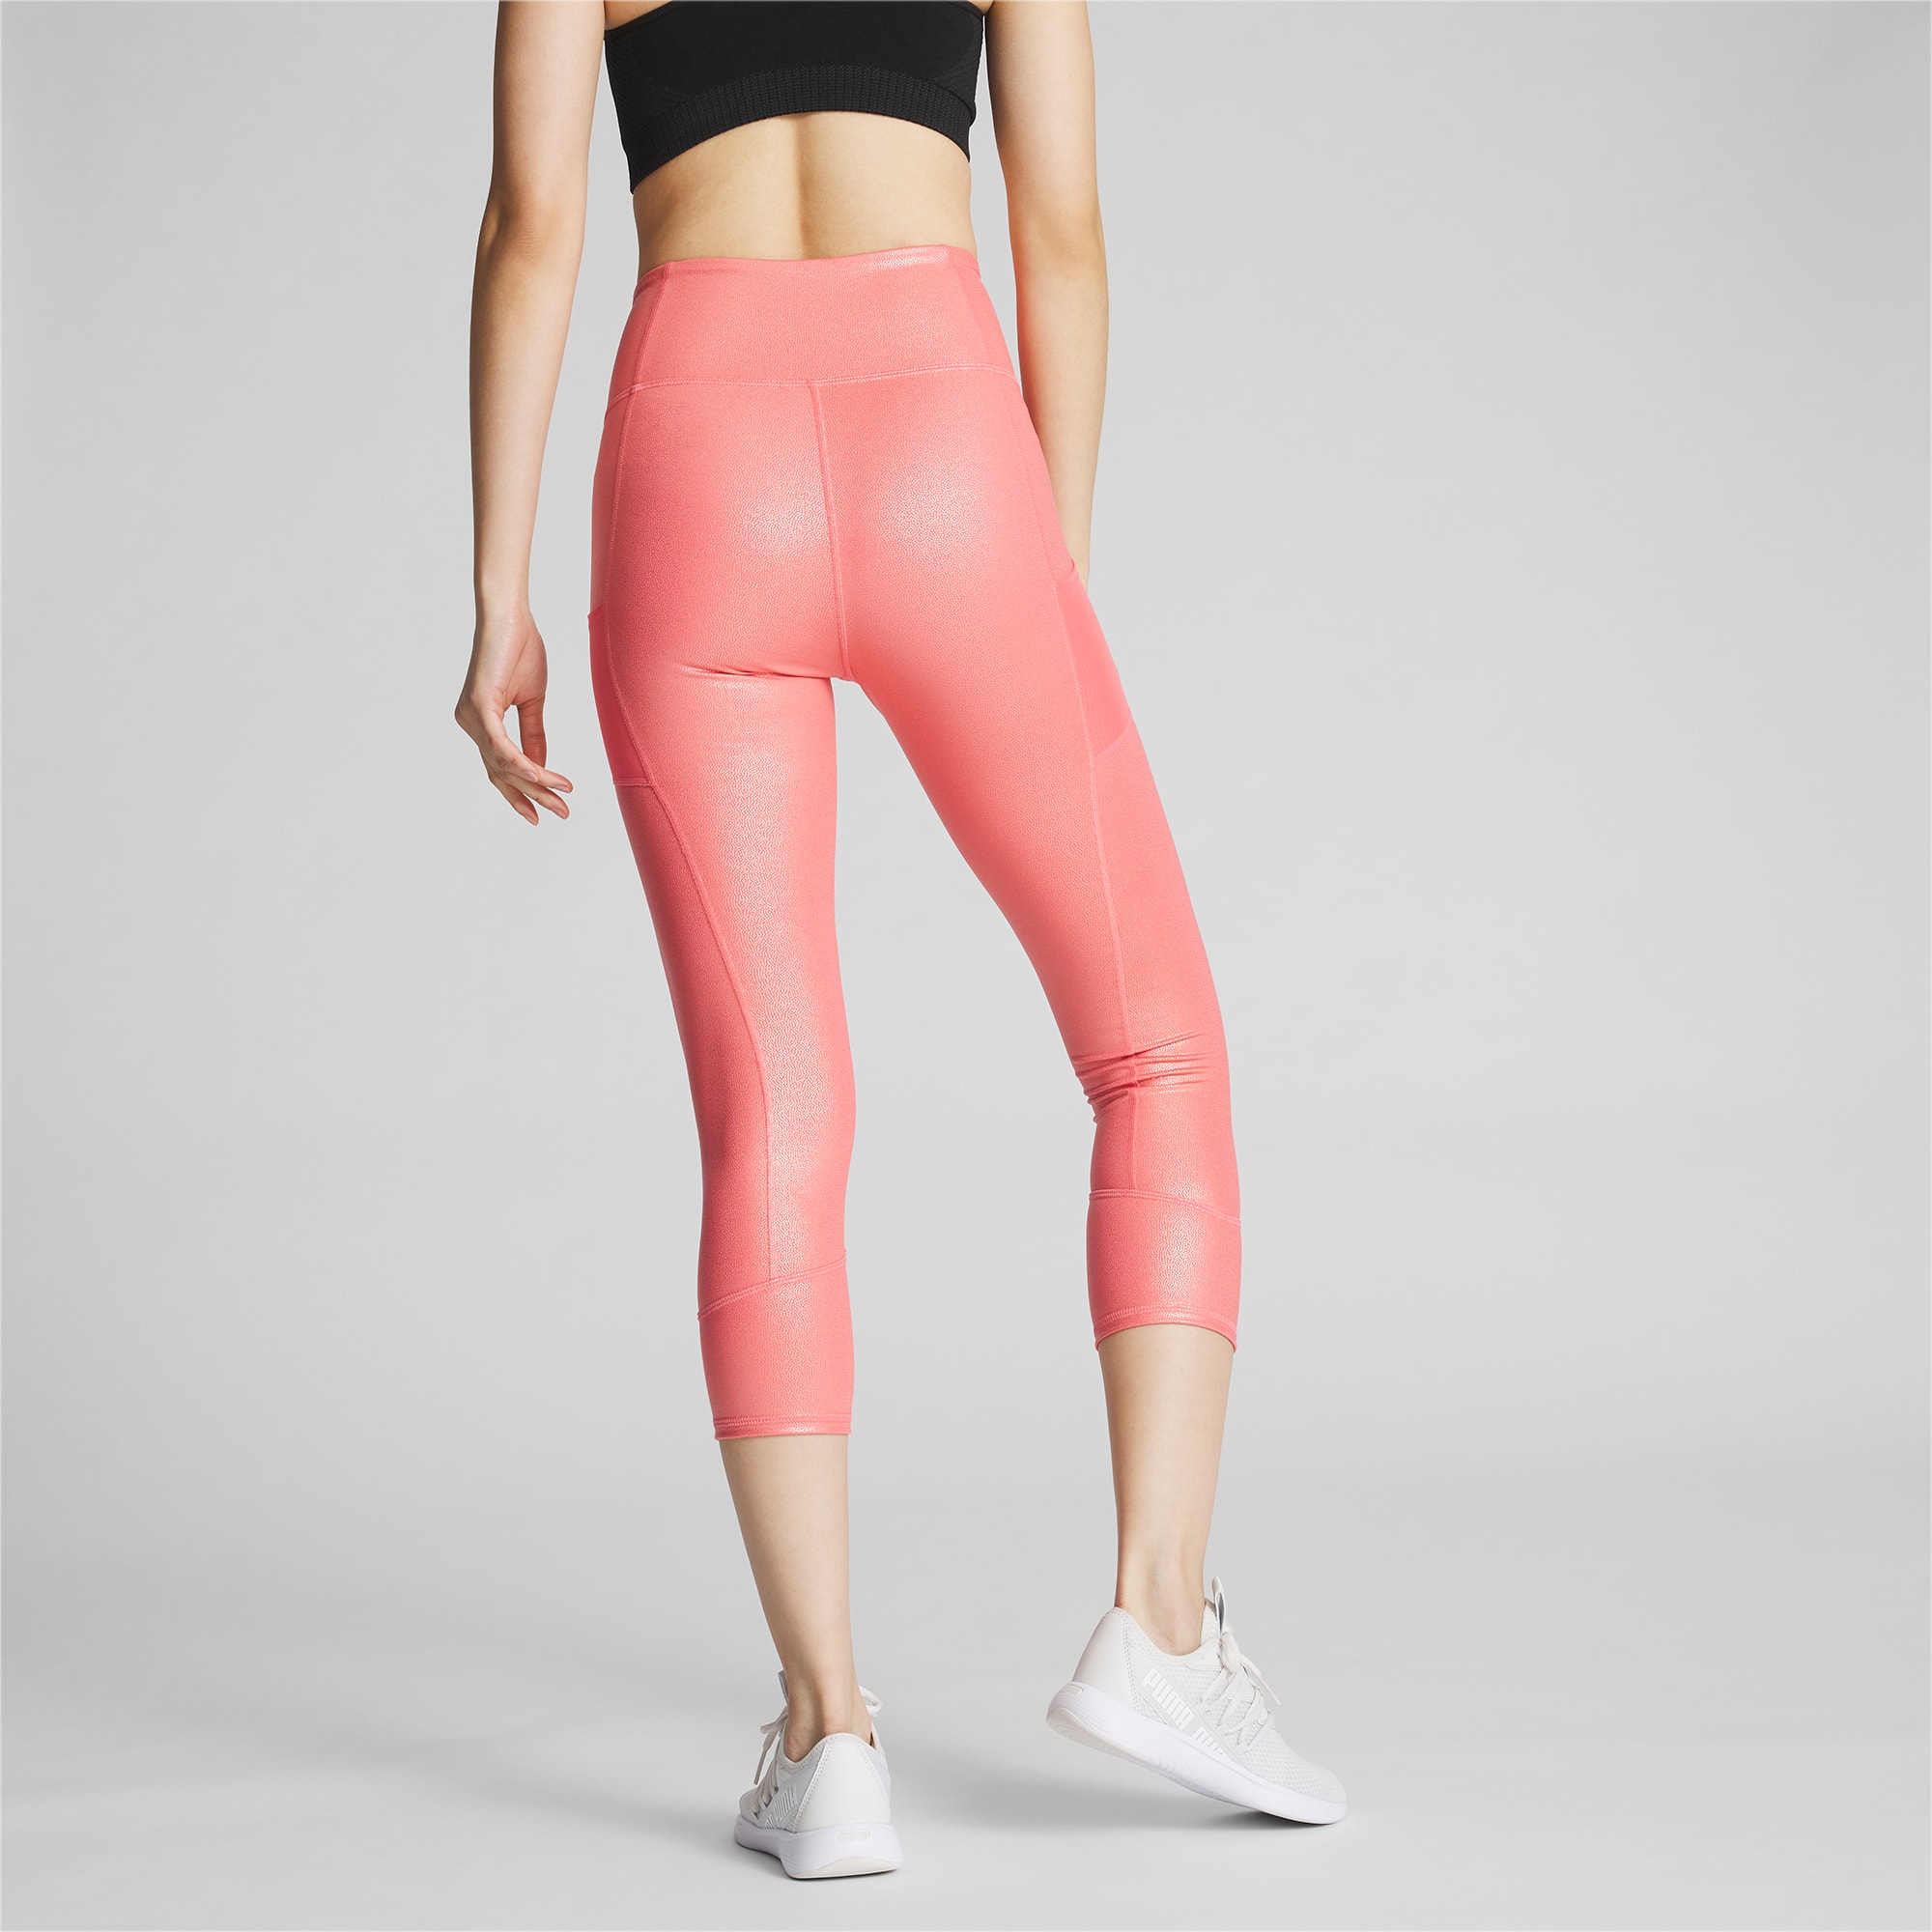 Puma Solid Navy Blue Leggings Size S - 63% off